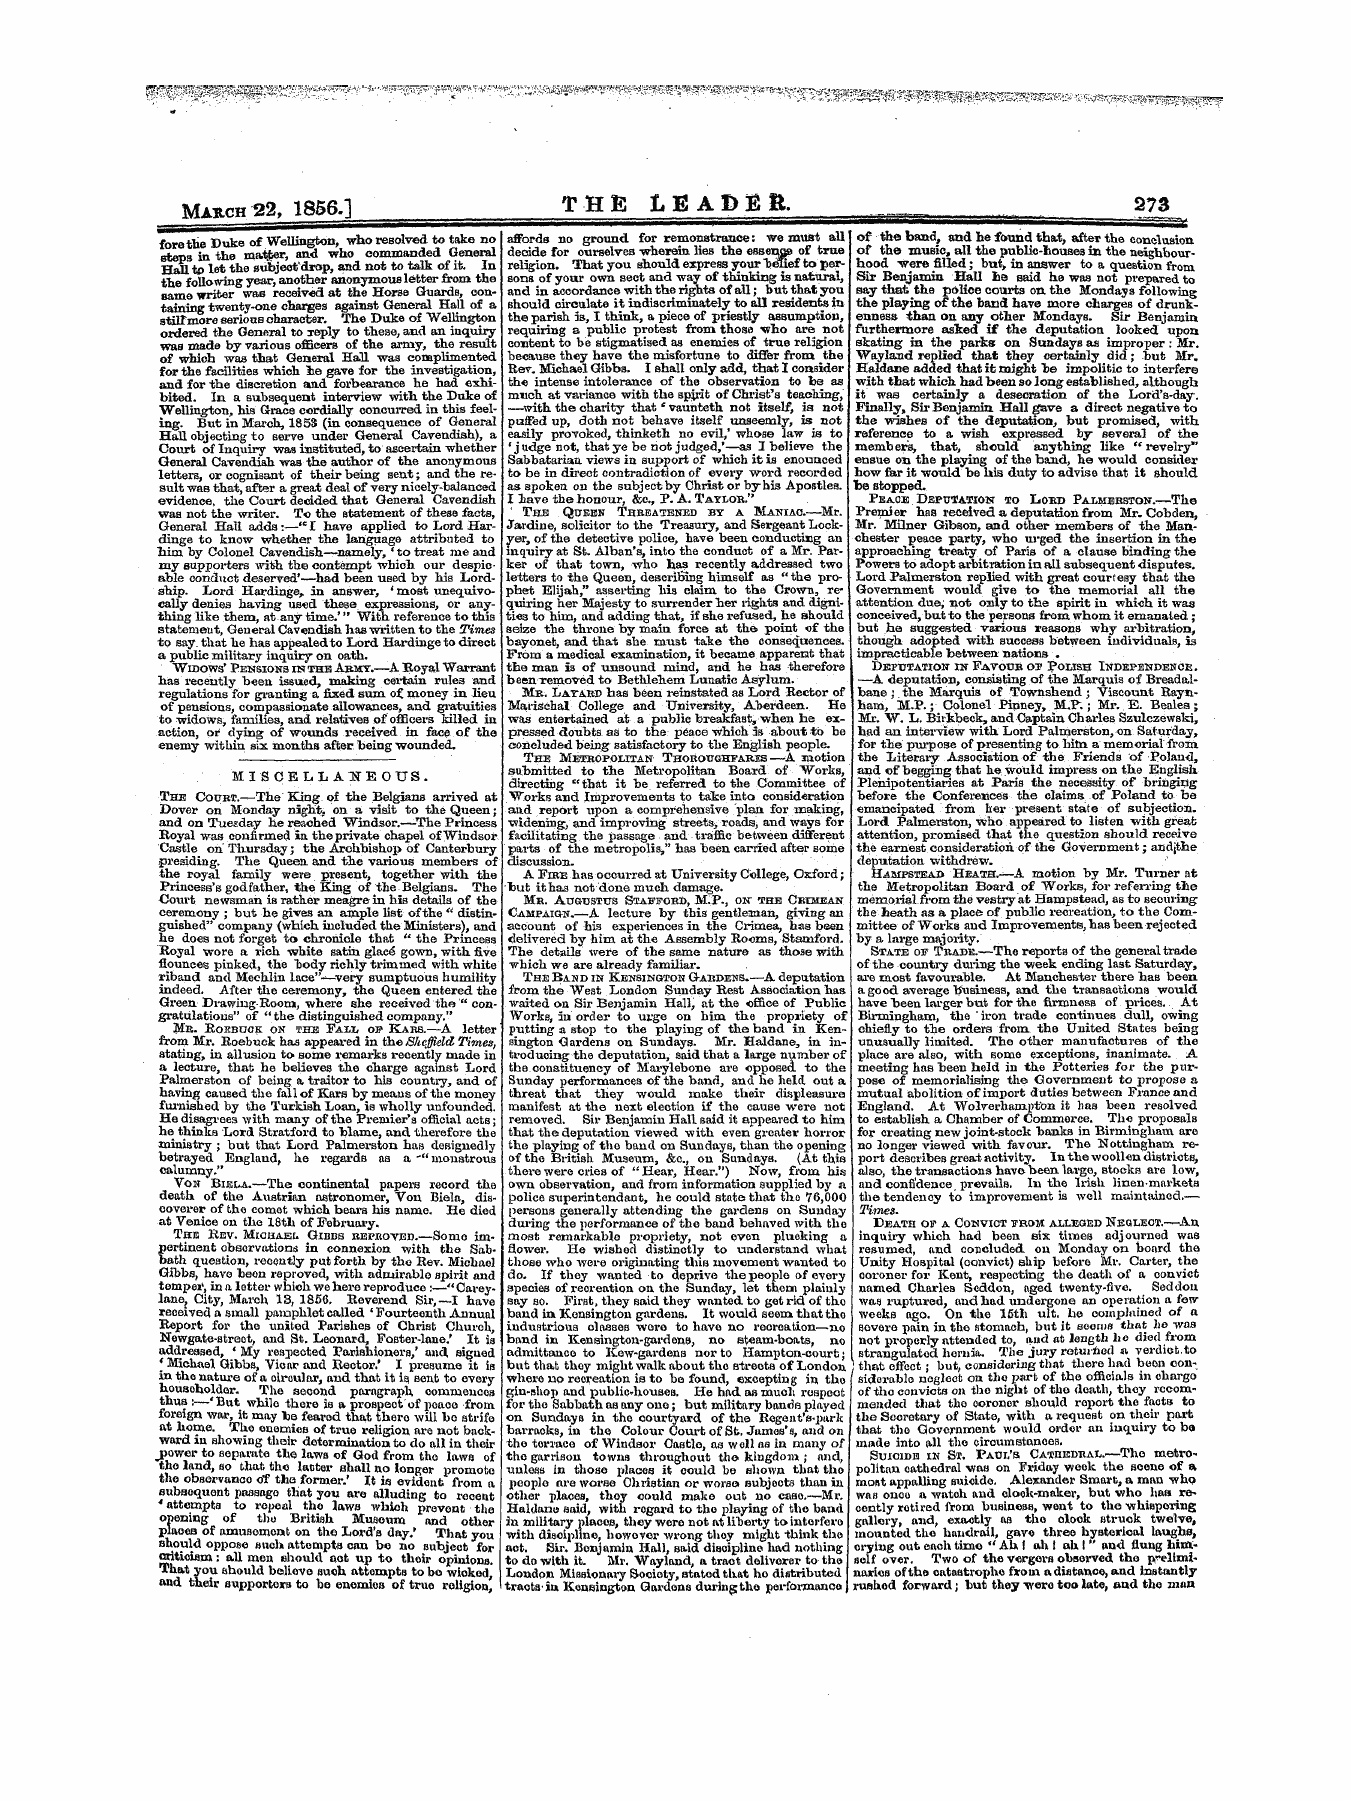 Leader (1850-1860): jS F Y, 1st edition: 9